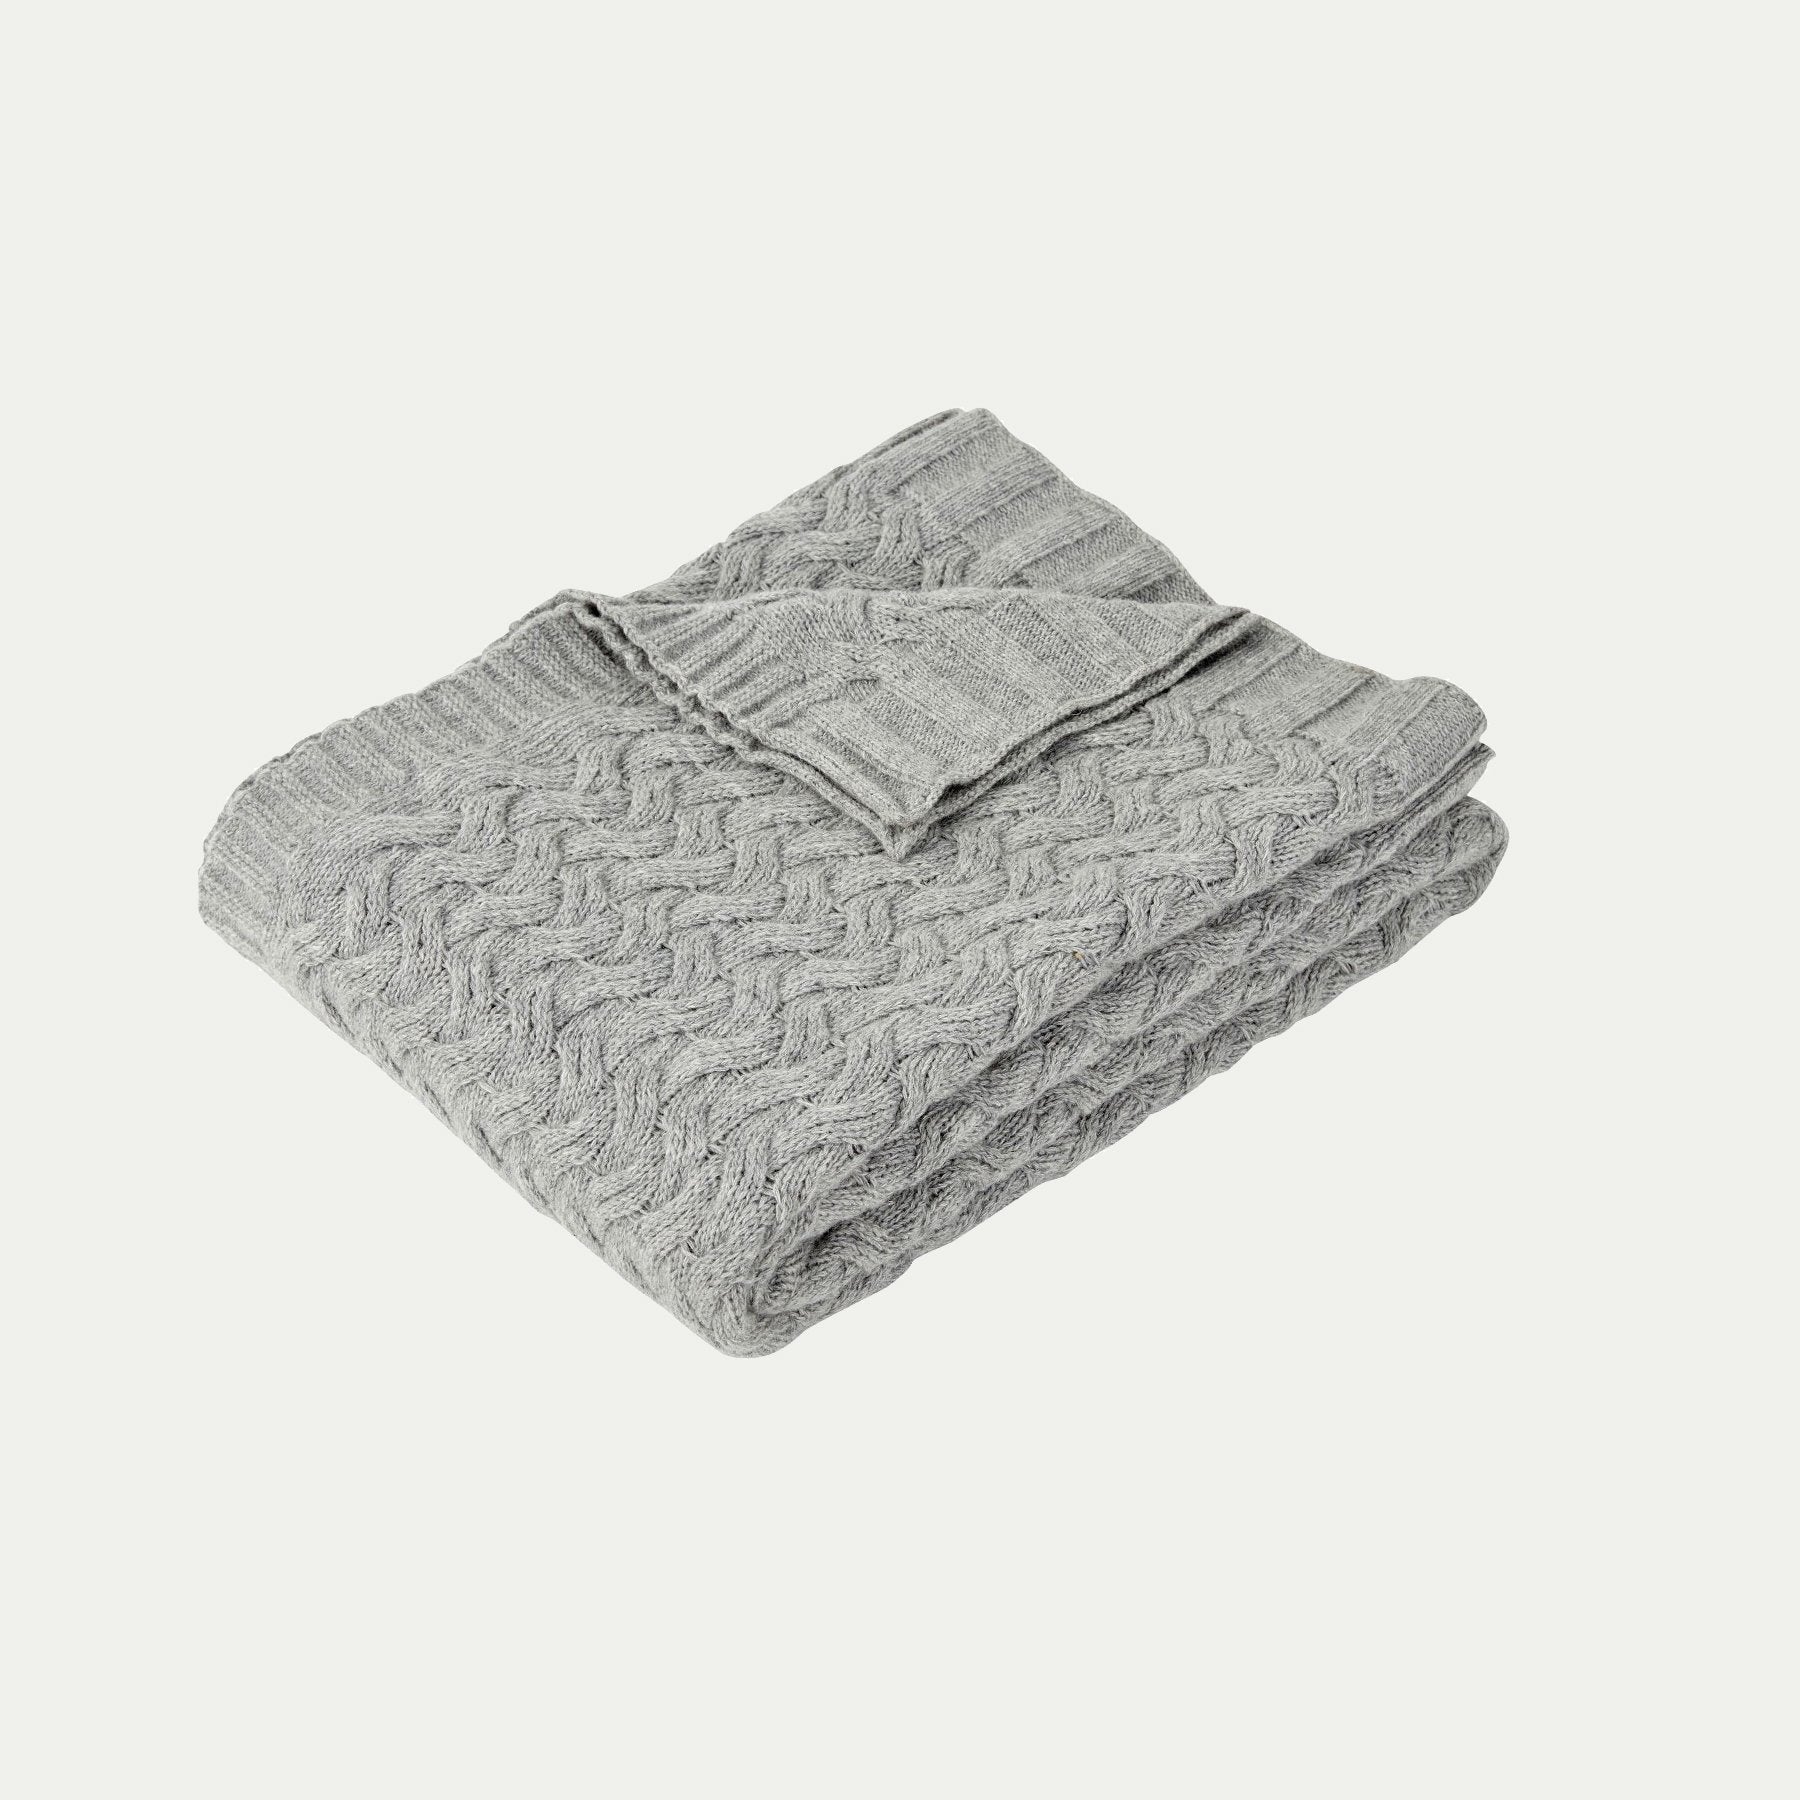 Hubsch Interior Scandi designer large wool cable knit throw blanket in pale grey on white background